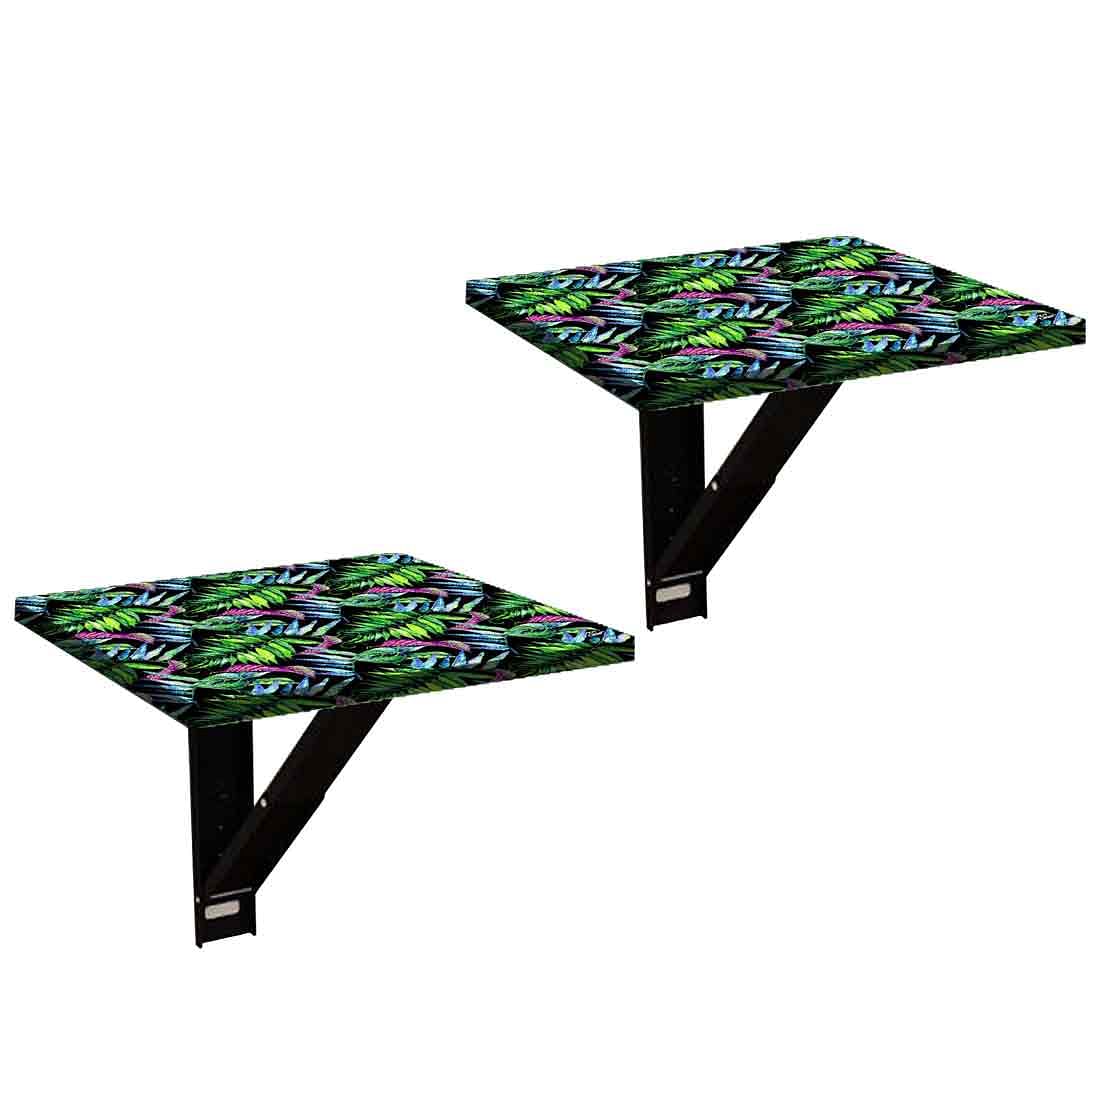 Wall Mounted Table for Bedroom - Green Blue Leaf Nutcase